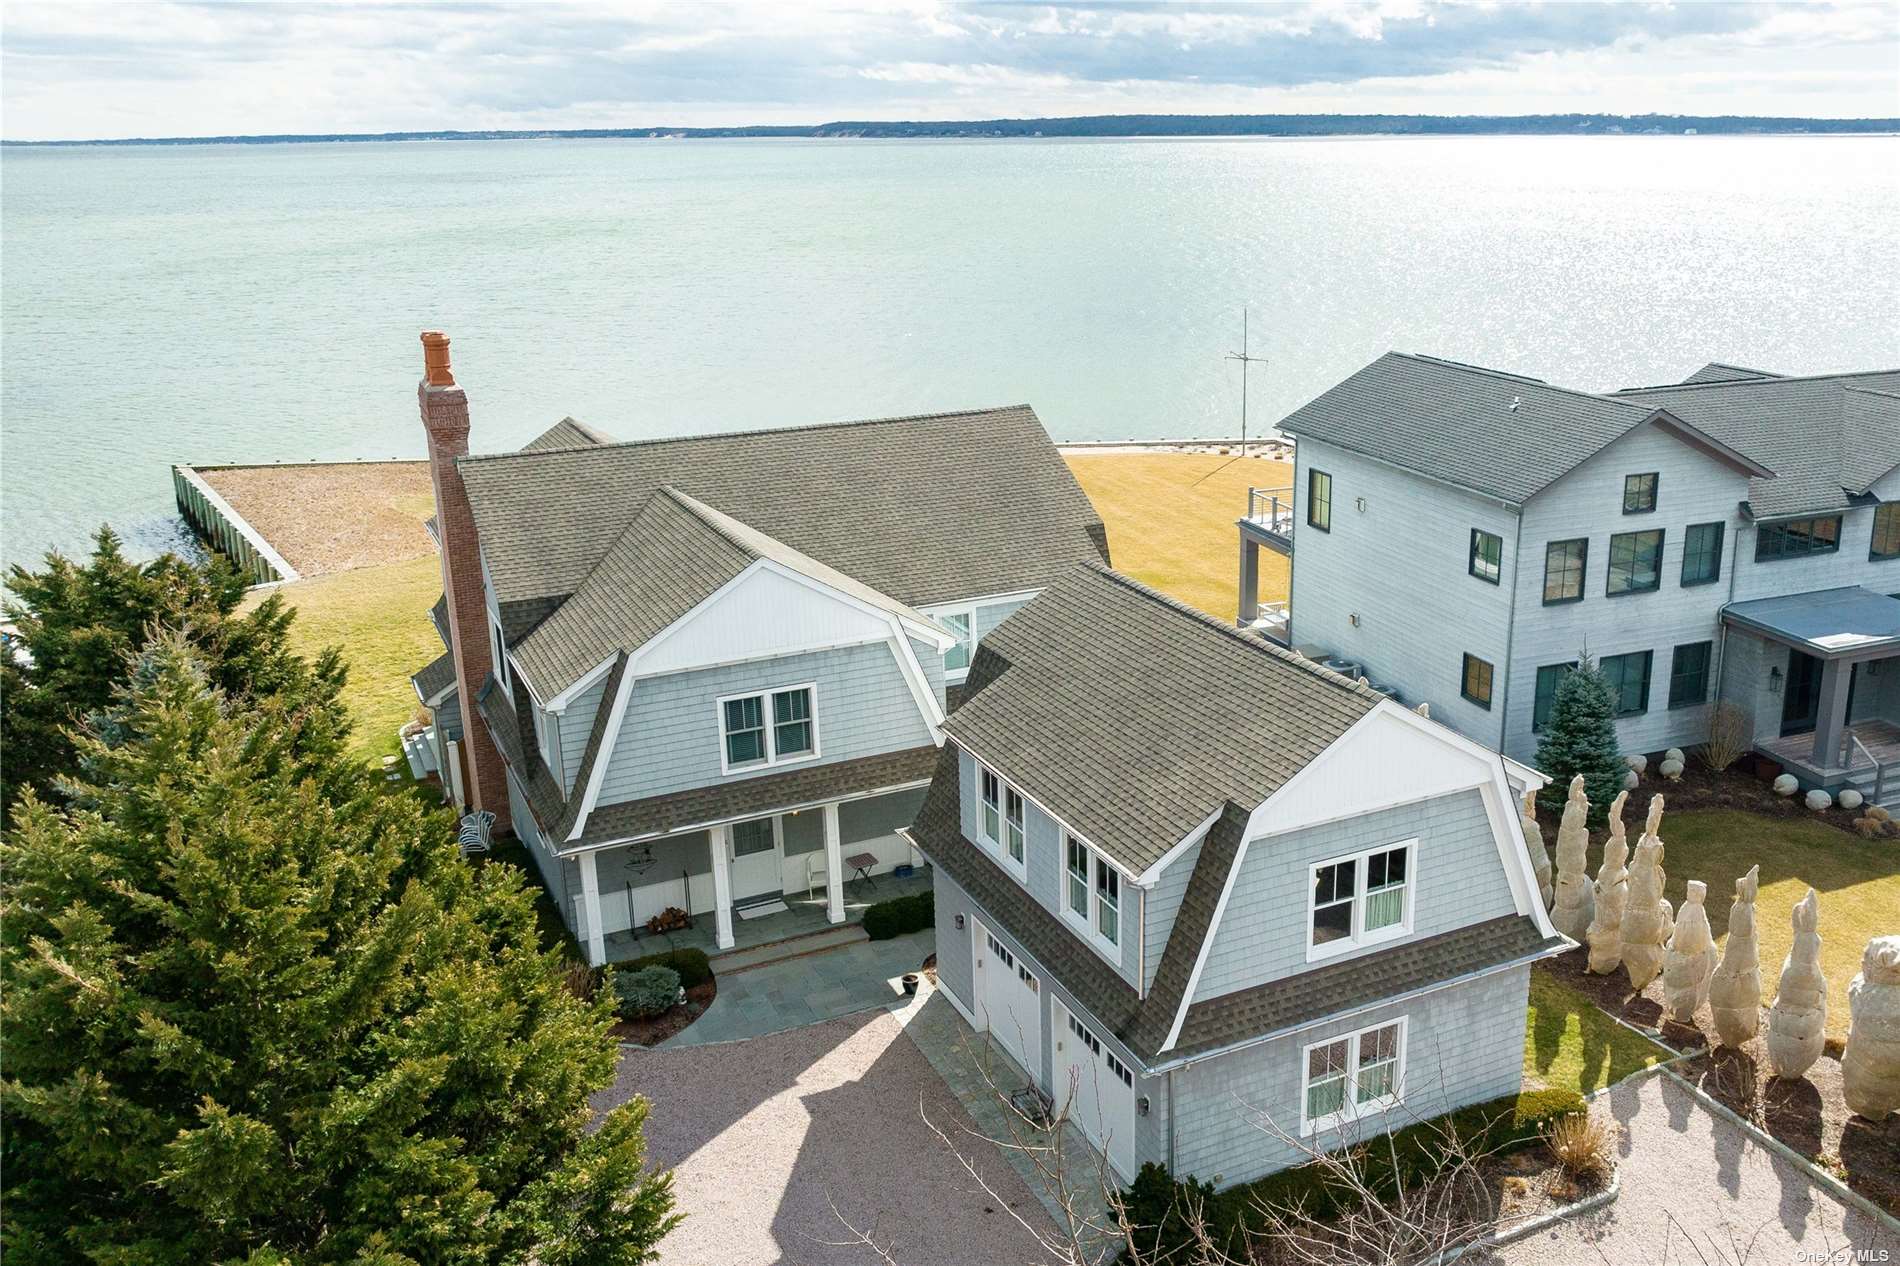 Property for Sale at 6 Tuts Lane, South Jamesport, Hamptons, NY - Bedrooms: 5 
Bathrooms: 4.5  - $3,195,000